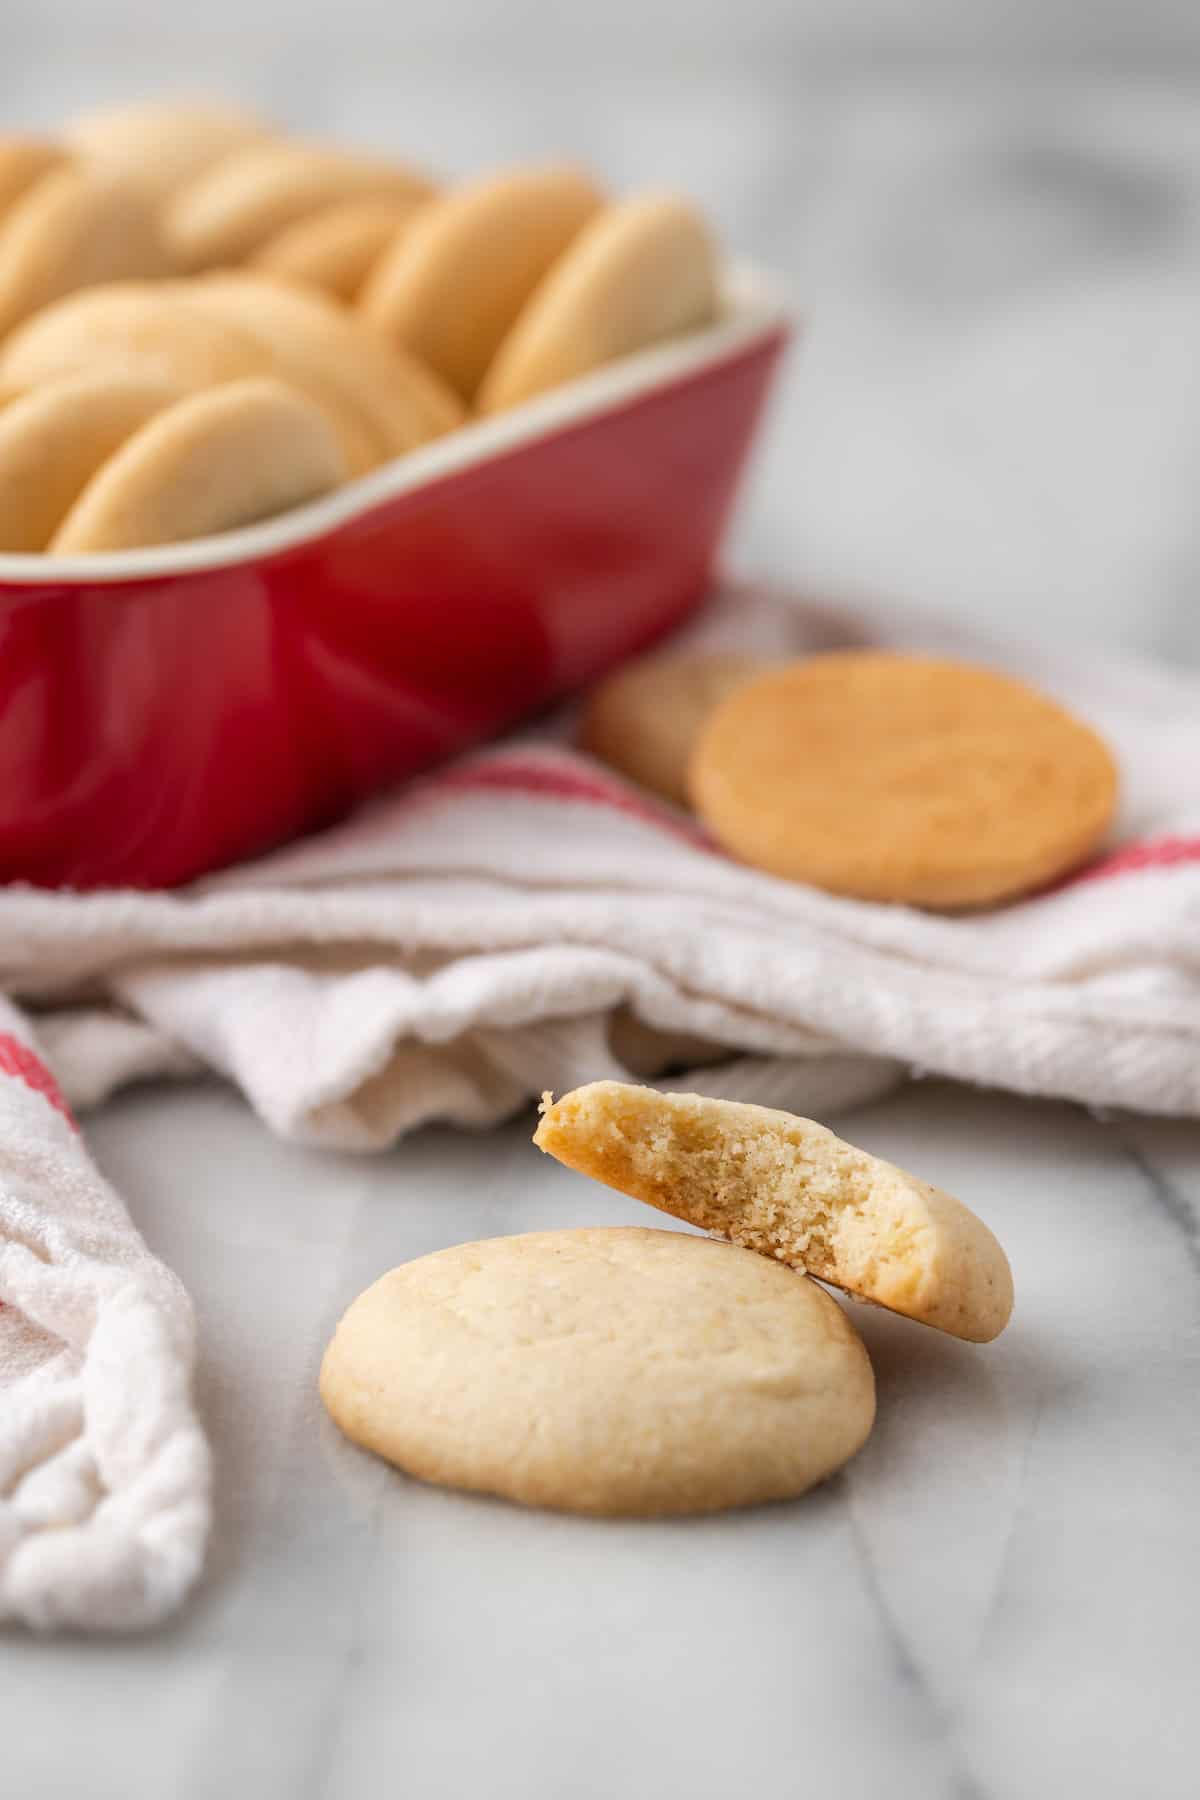 Two gluten-free vanilla wafers stacked on top of one another, with a bite missing from the top cookie, and more cookies in a baking dish in the background.